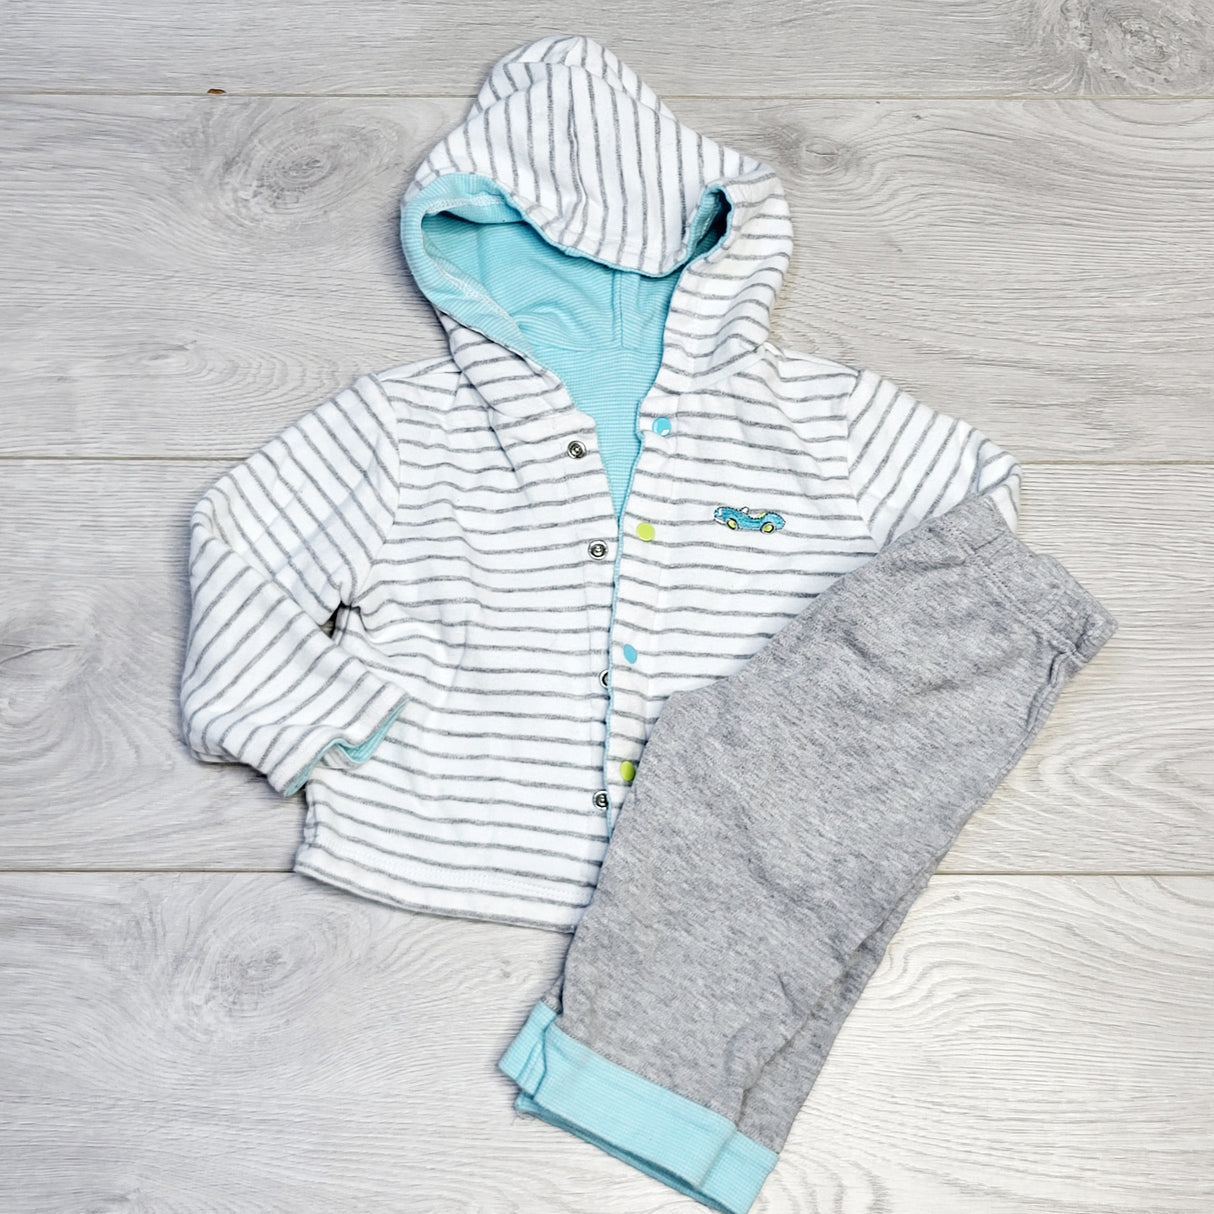 CHOL2 - 2pc set with reversible hoodie, size 9 months